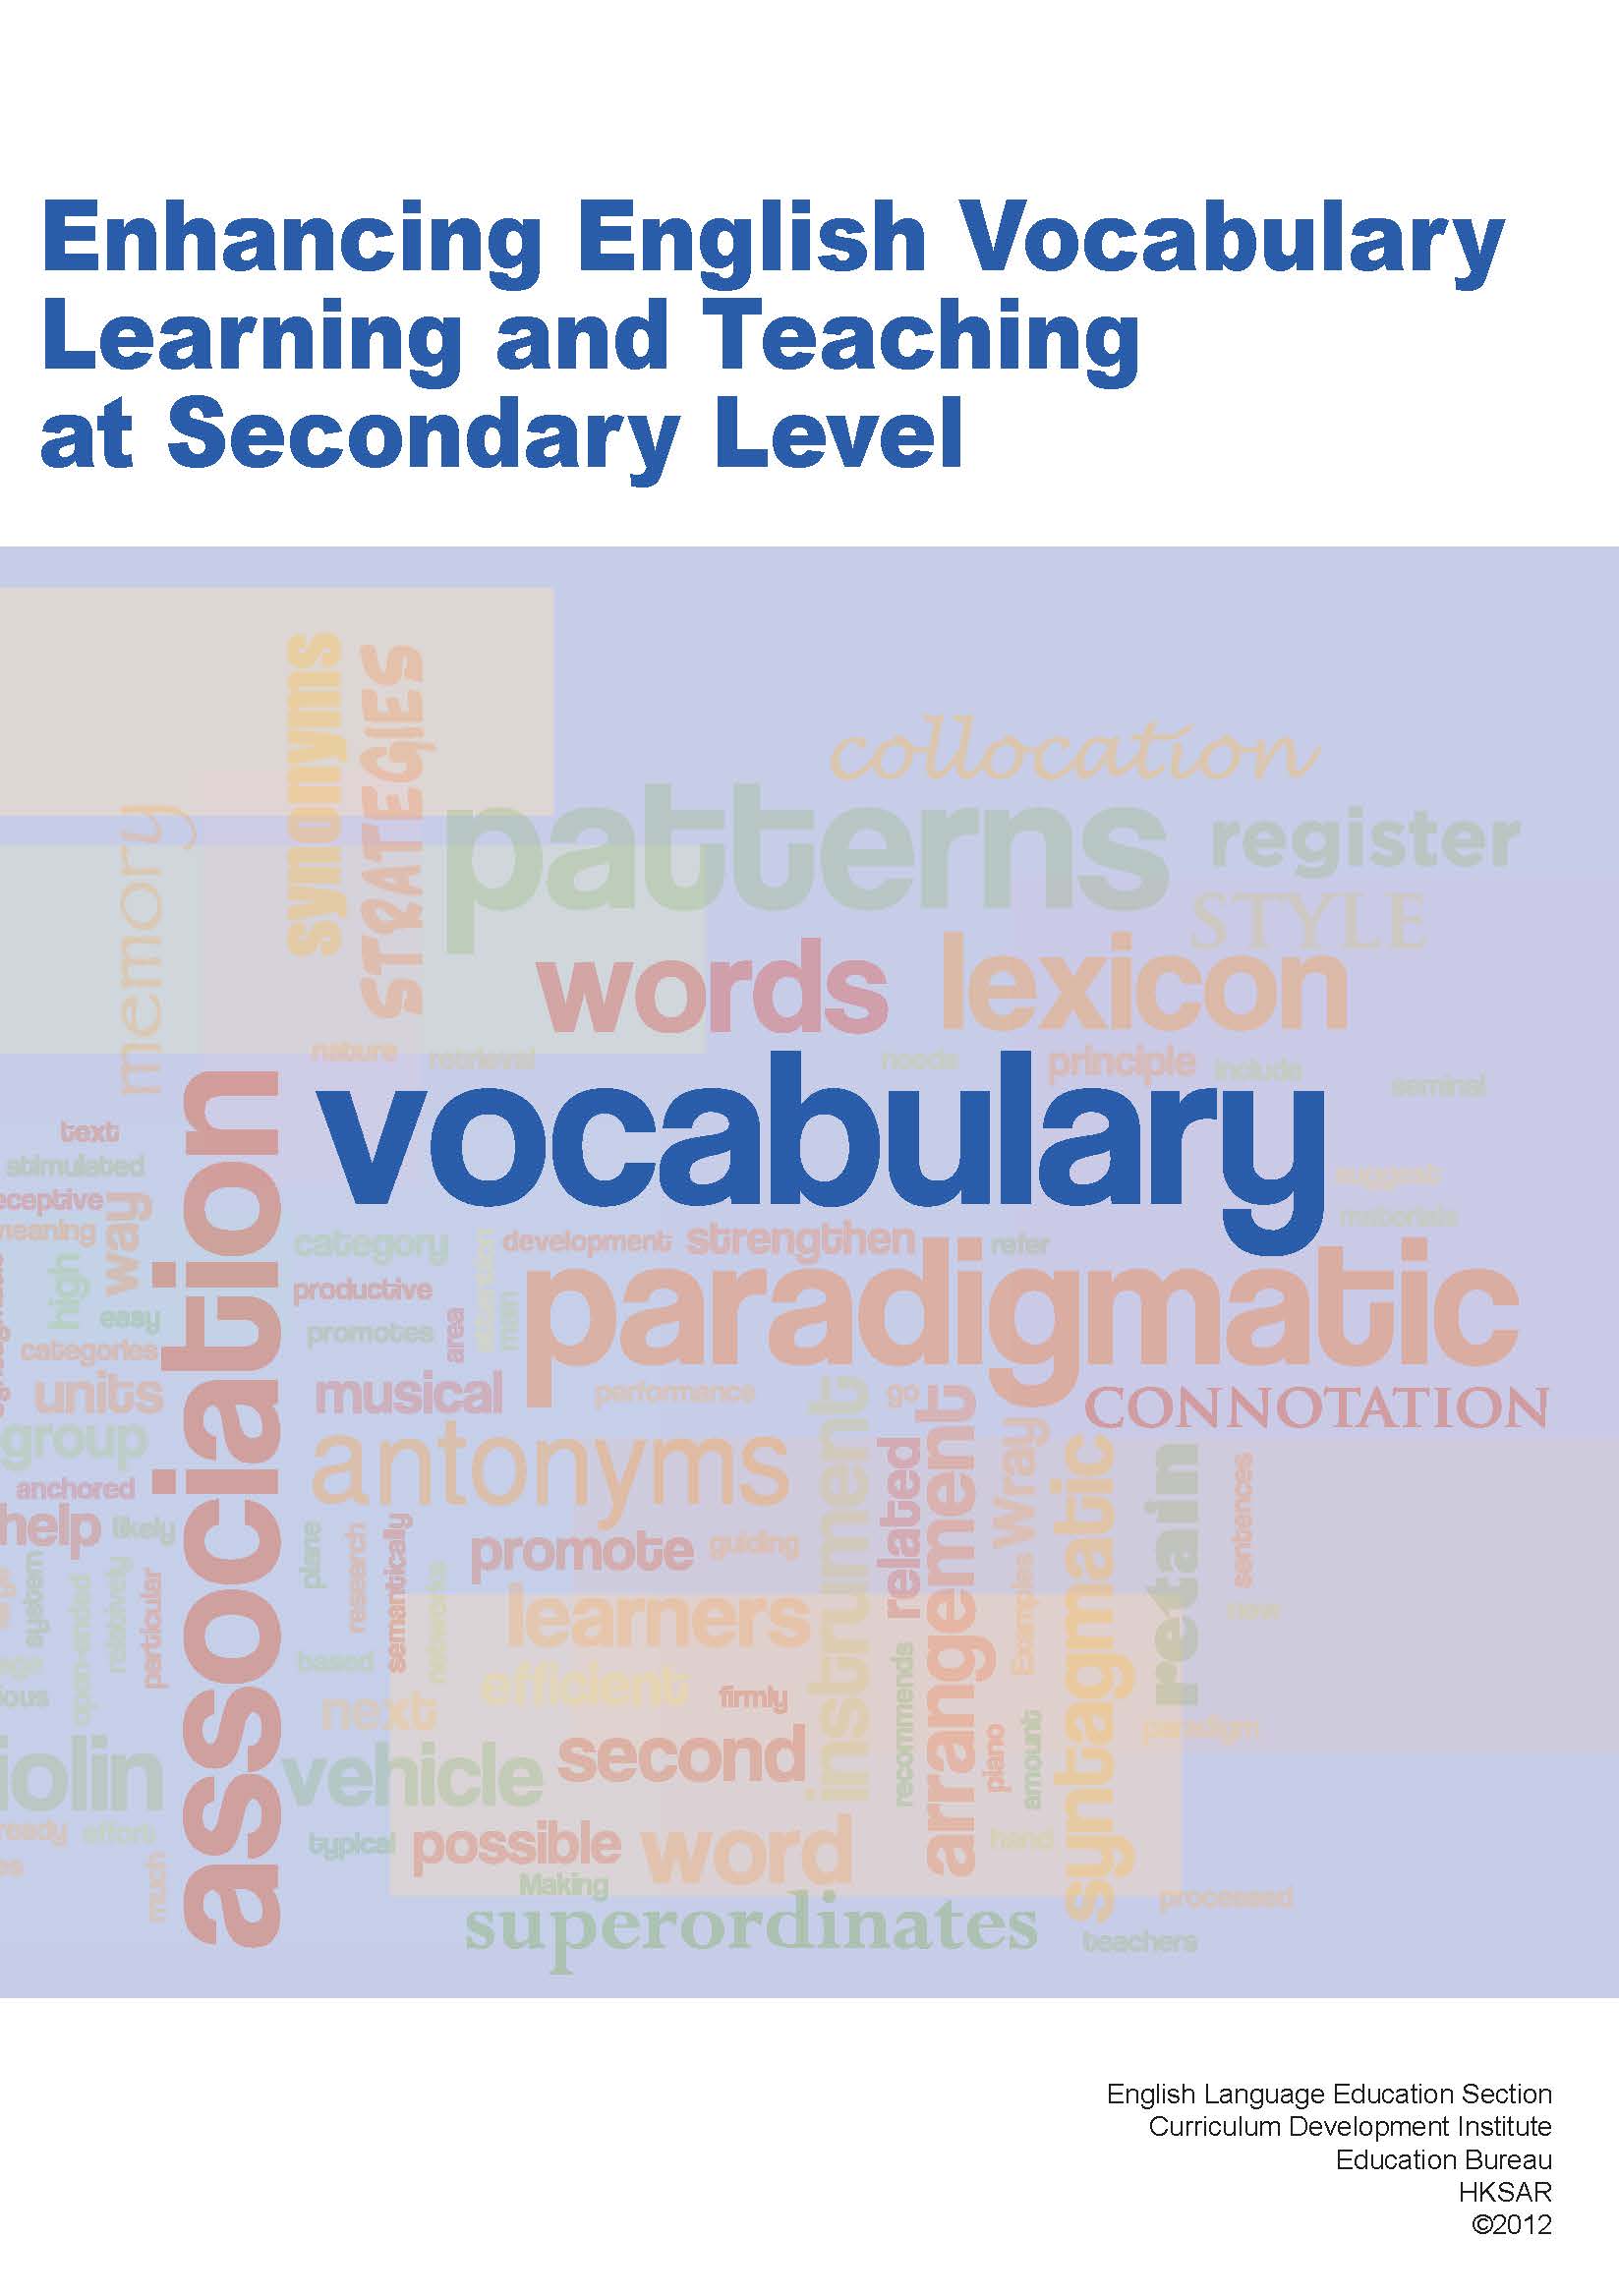 Resource Package on Vocabulary